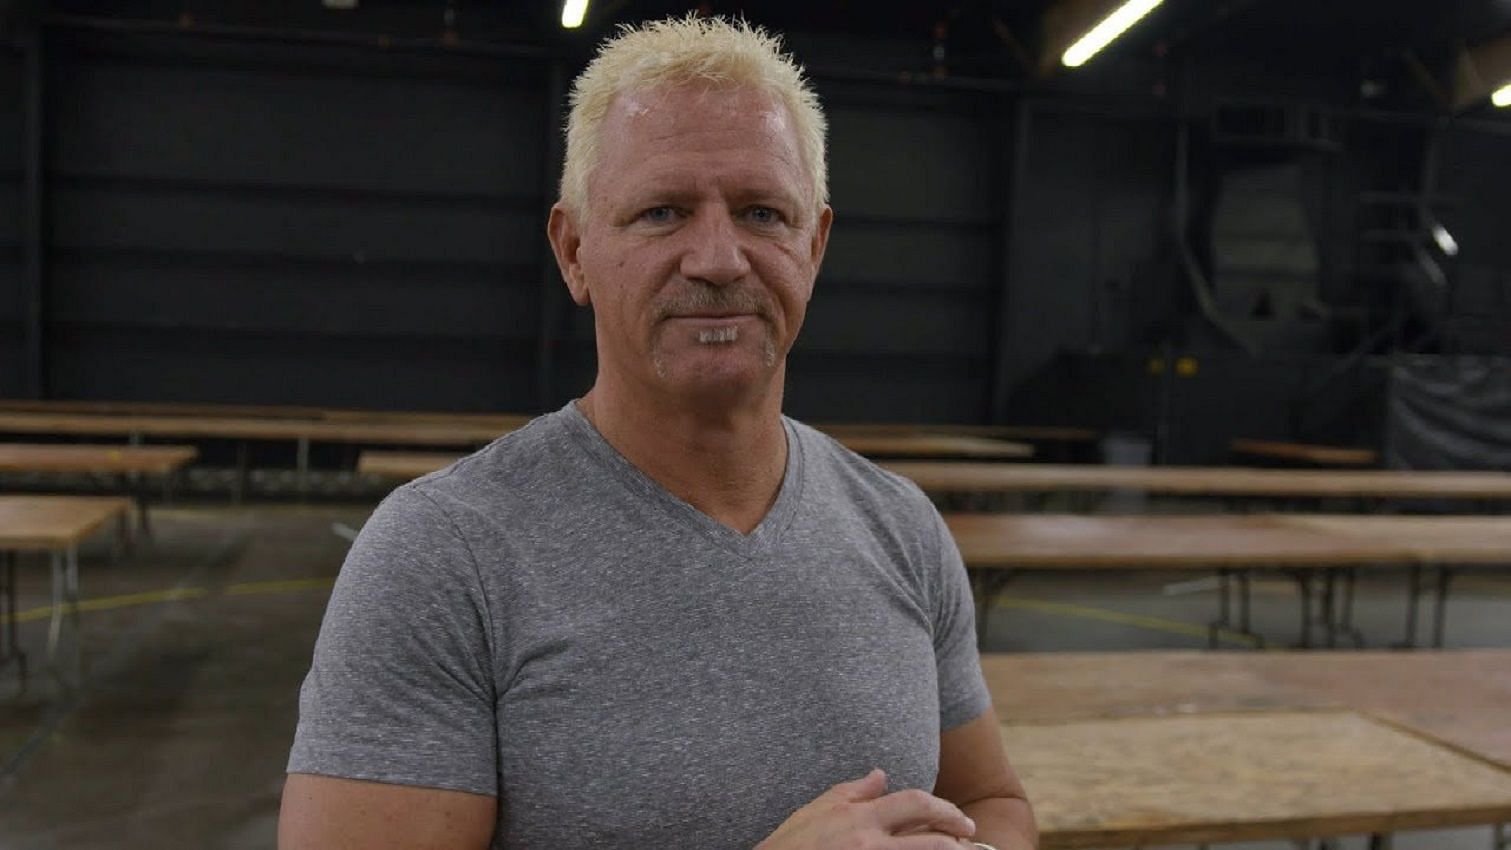 Jeff Jarrett lives in Nashville, a lot closer to many AEW shows than he was when in WWE